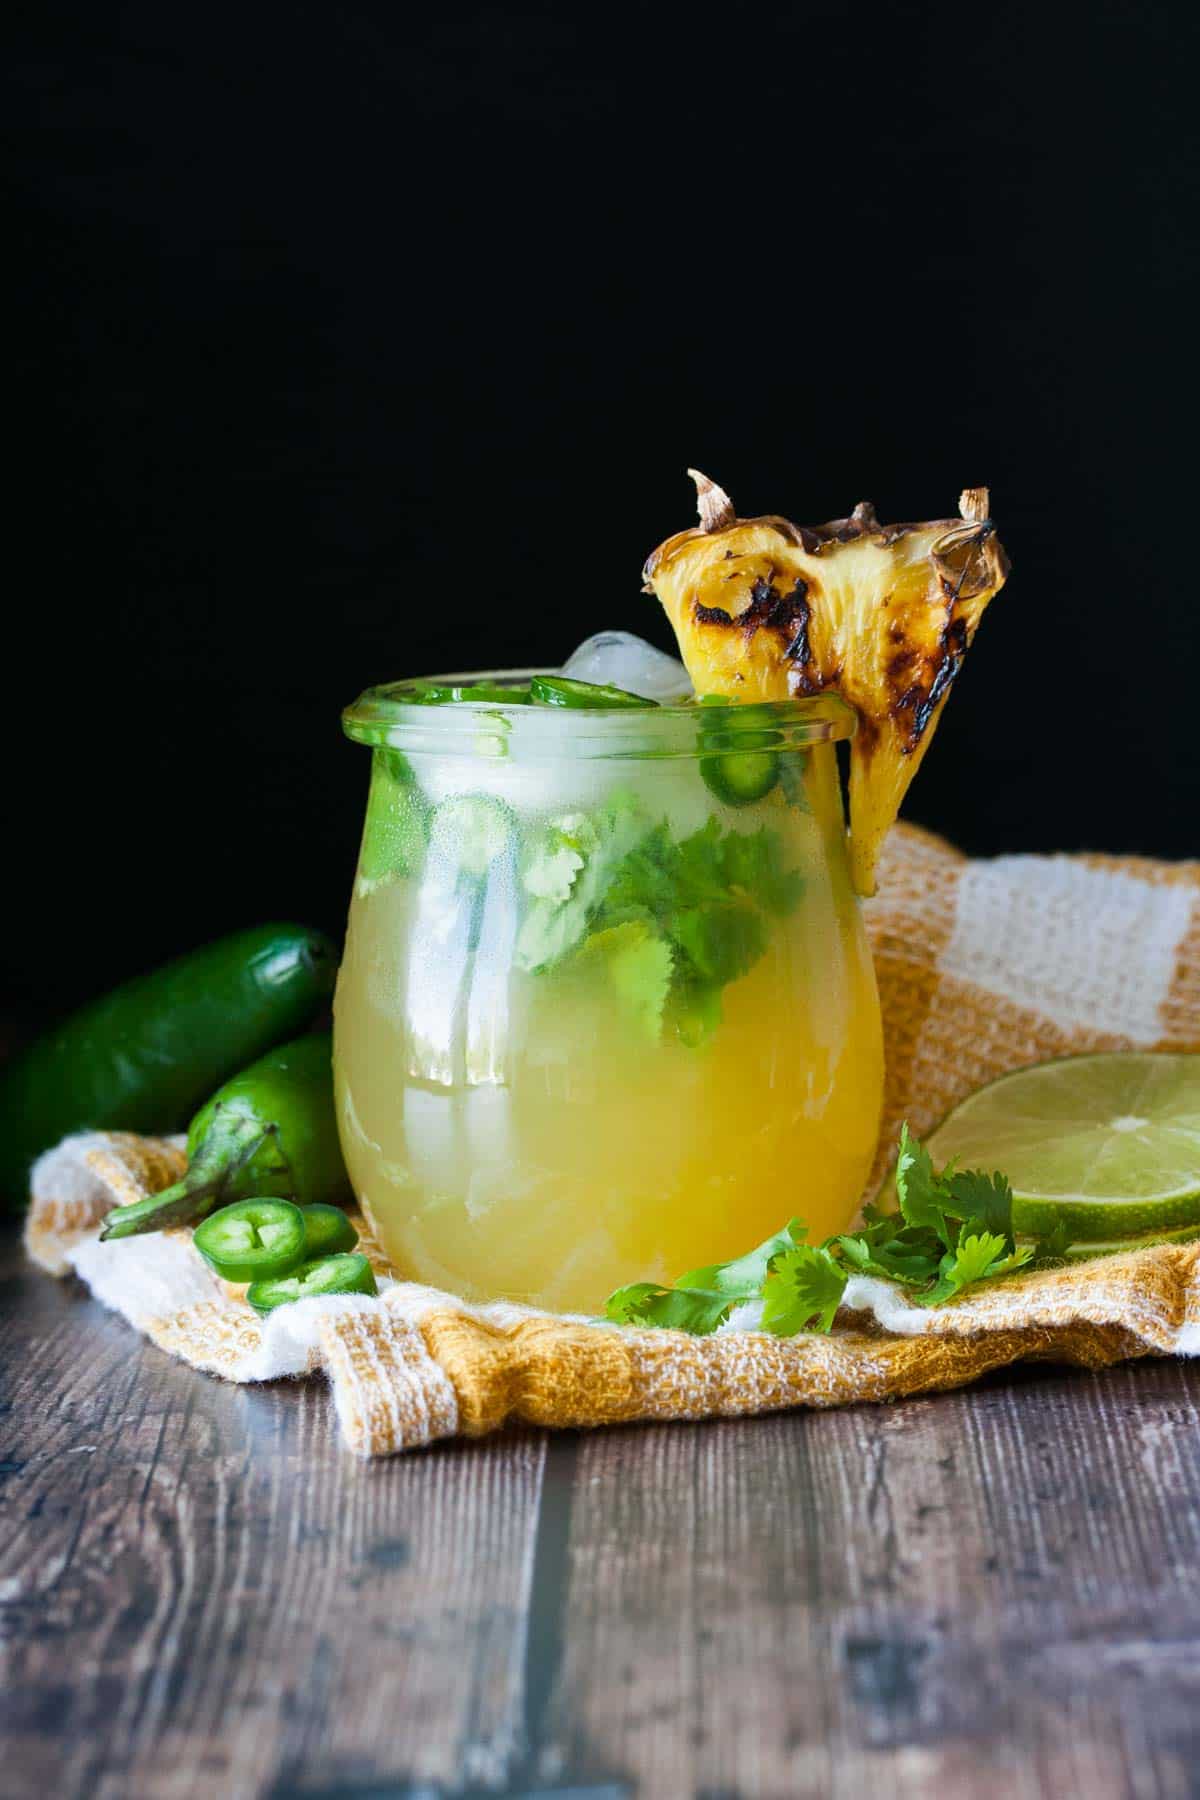 A pineapple jalapeño margarita in a glass with a pineapple garnish